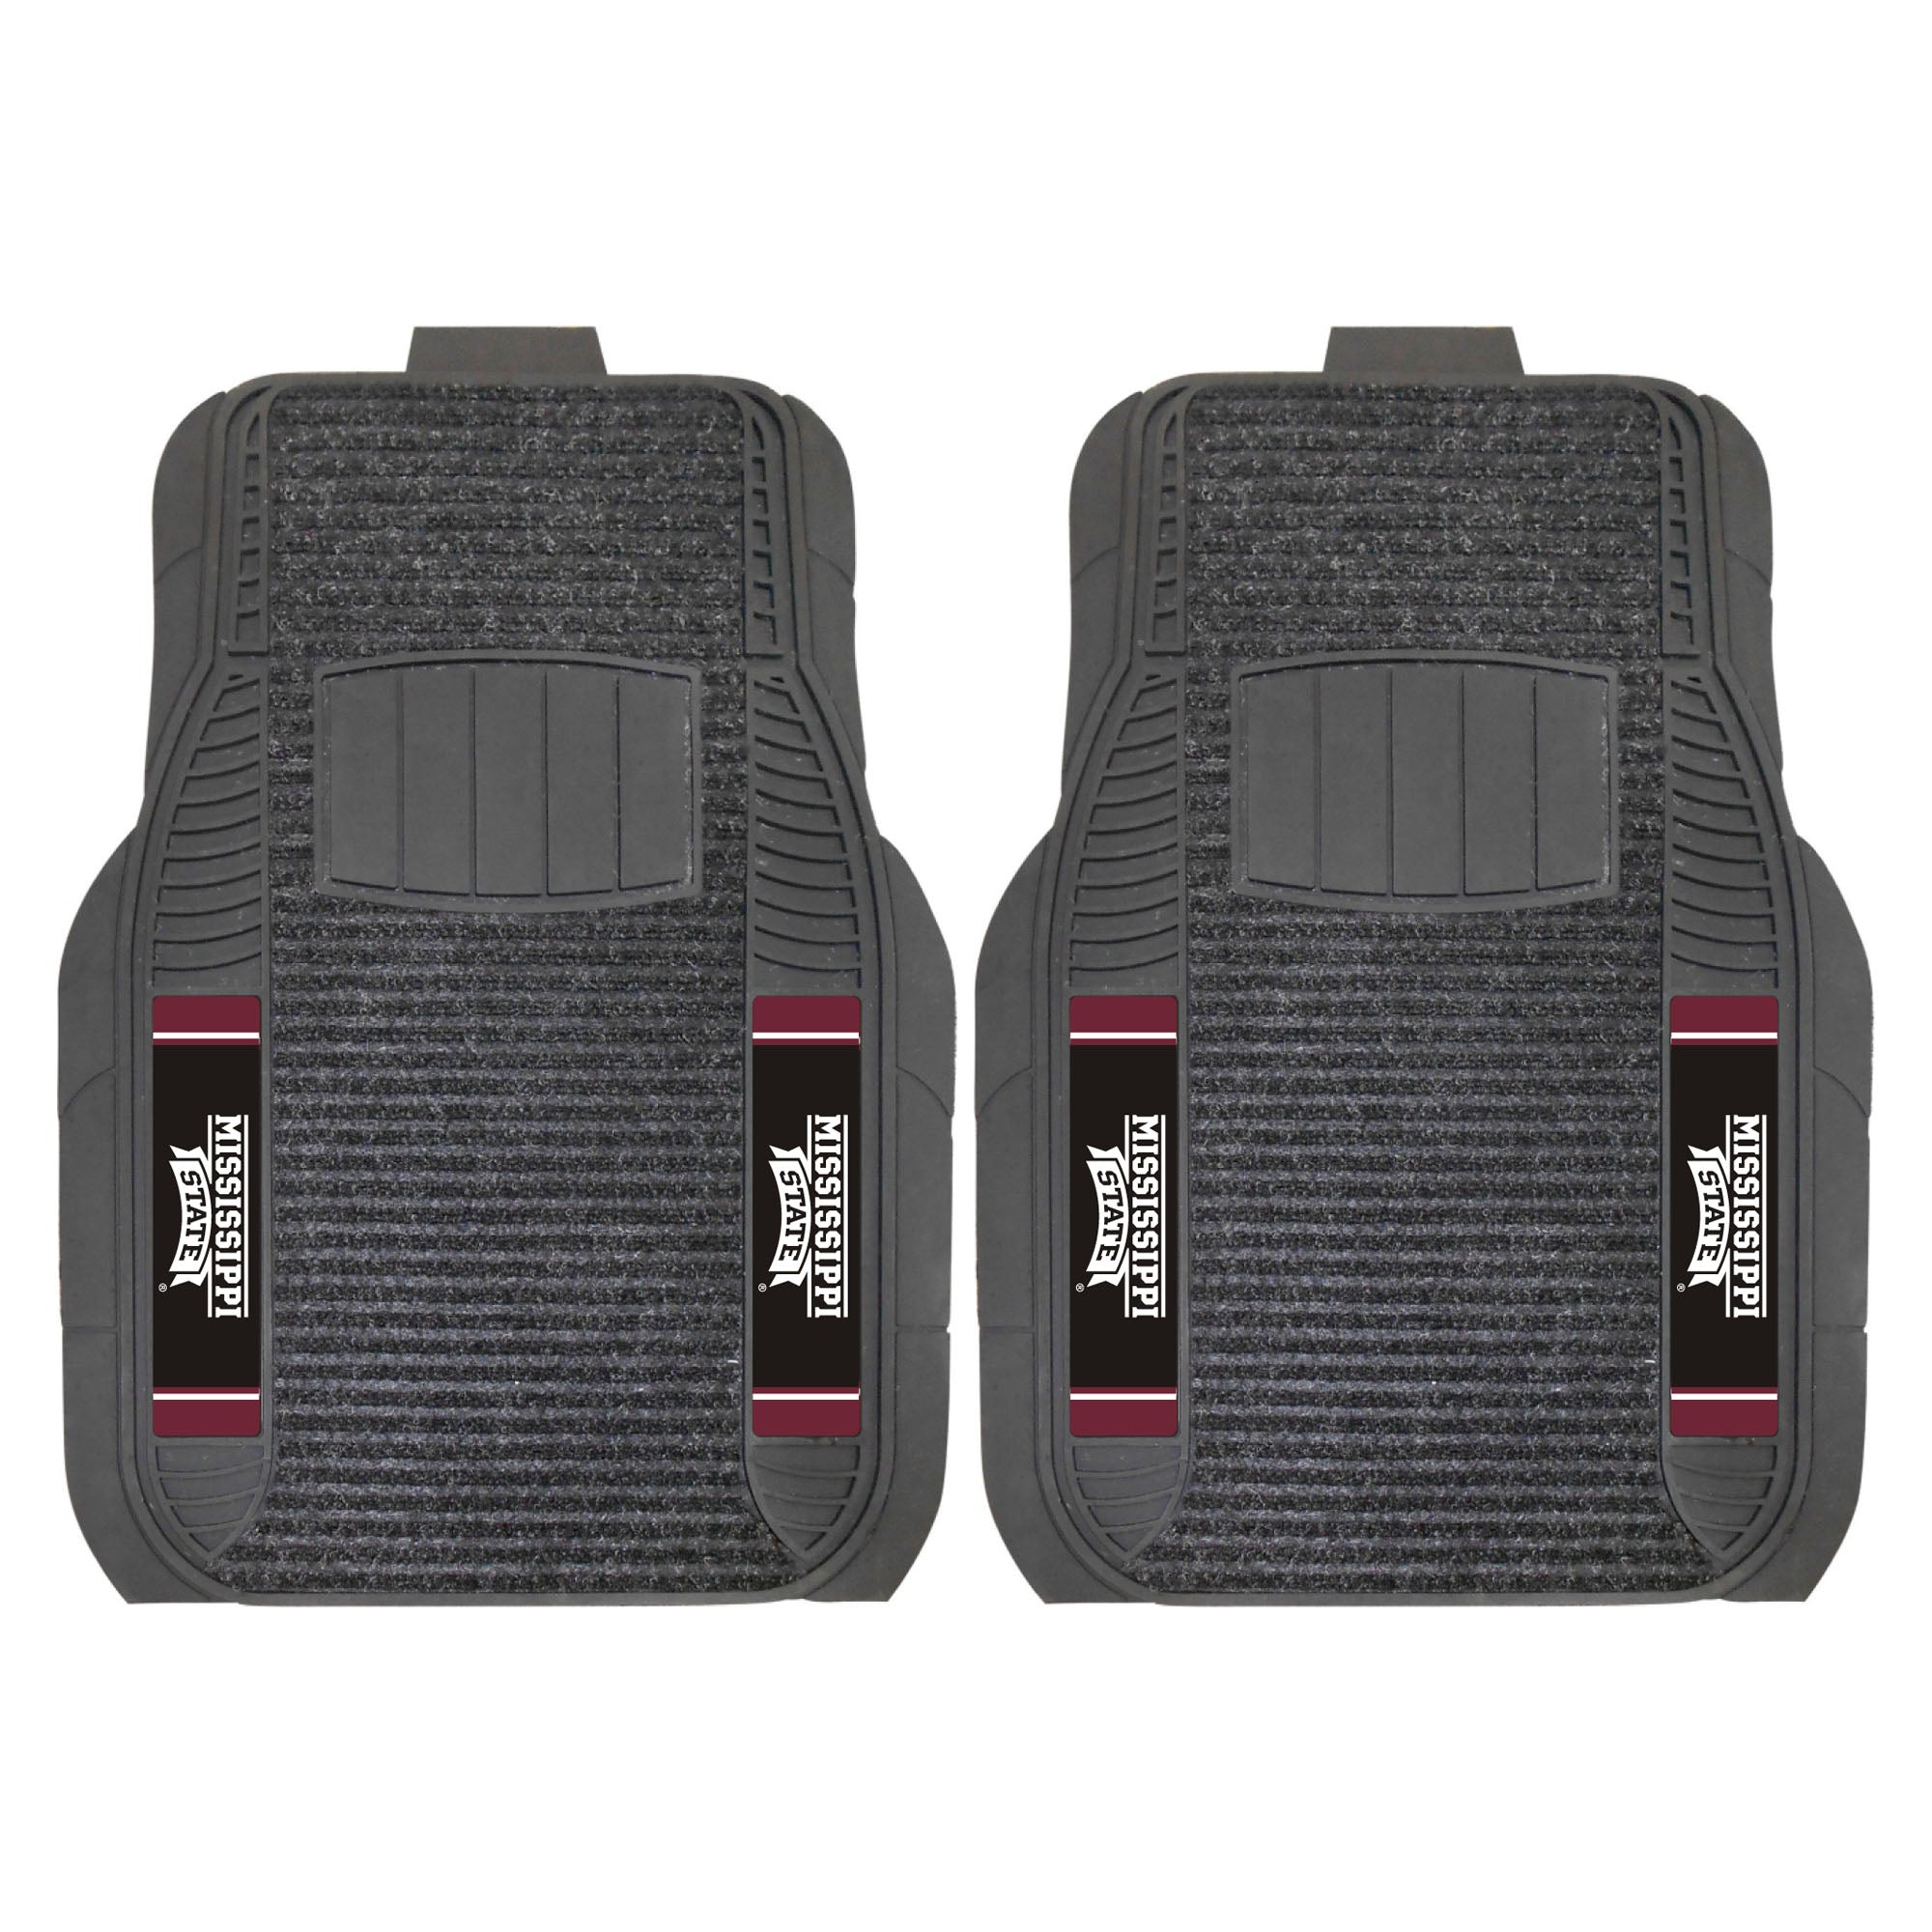 FANMATS, Mississippi State University 2 Piece Deluxe Car Mat Set